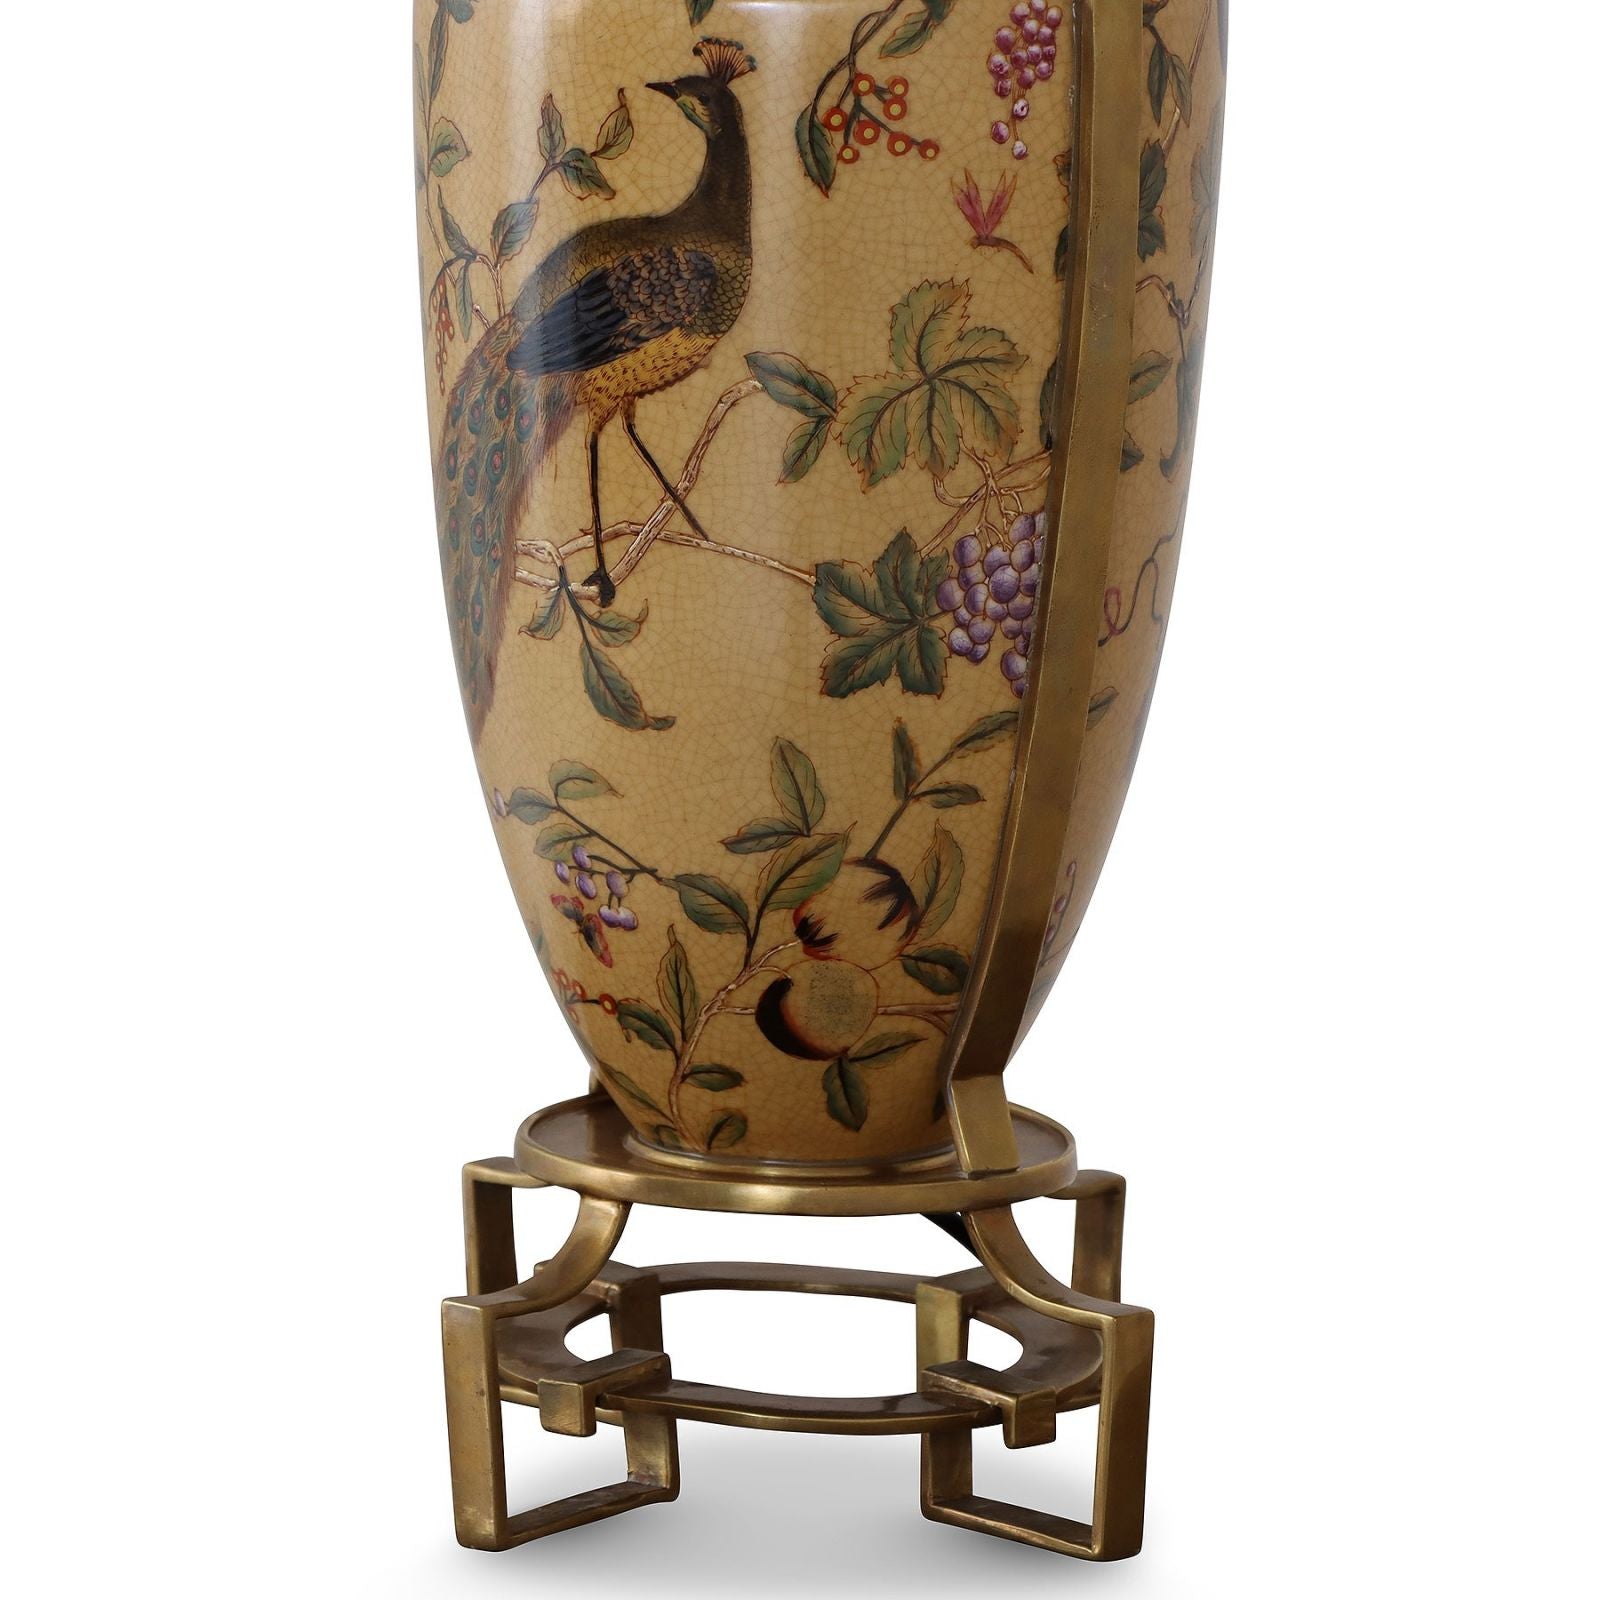 Porcelain vase table lamp with hand painted peacock and floral design